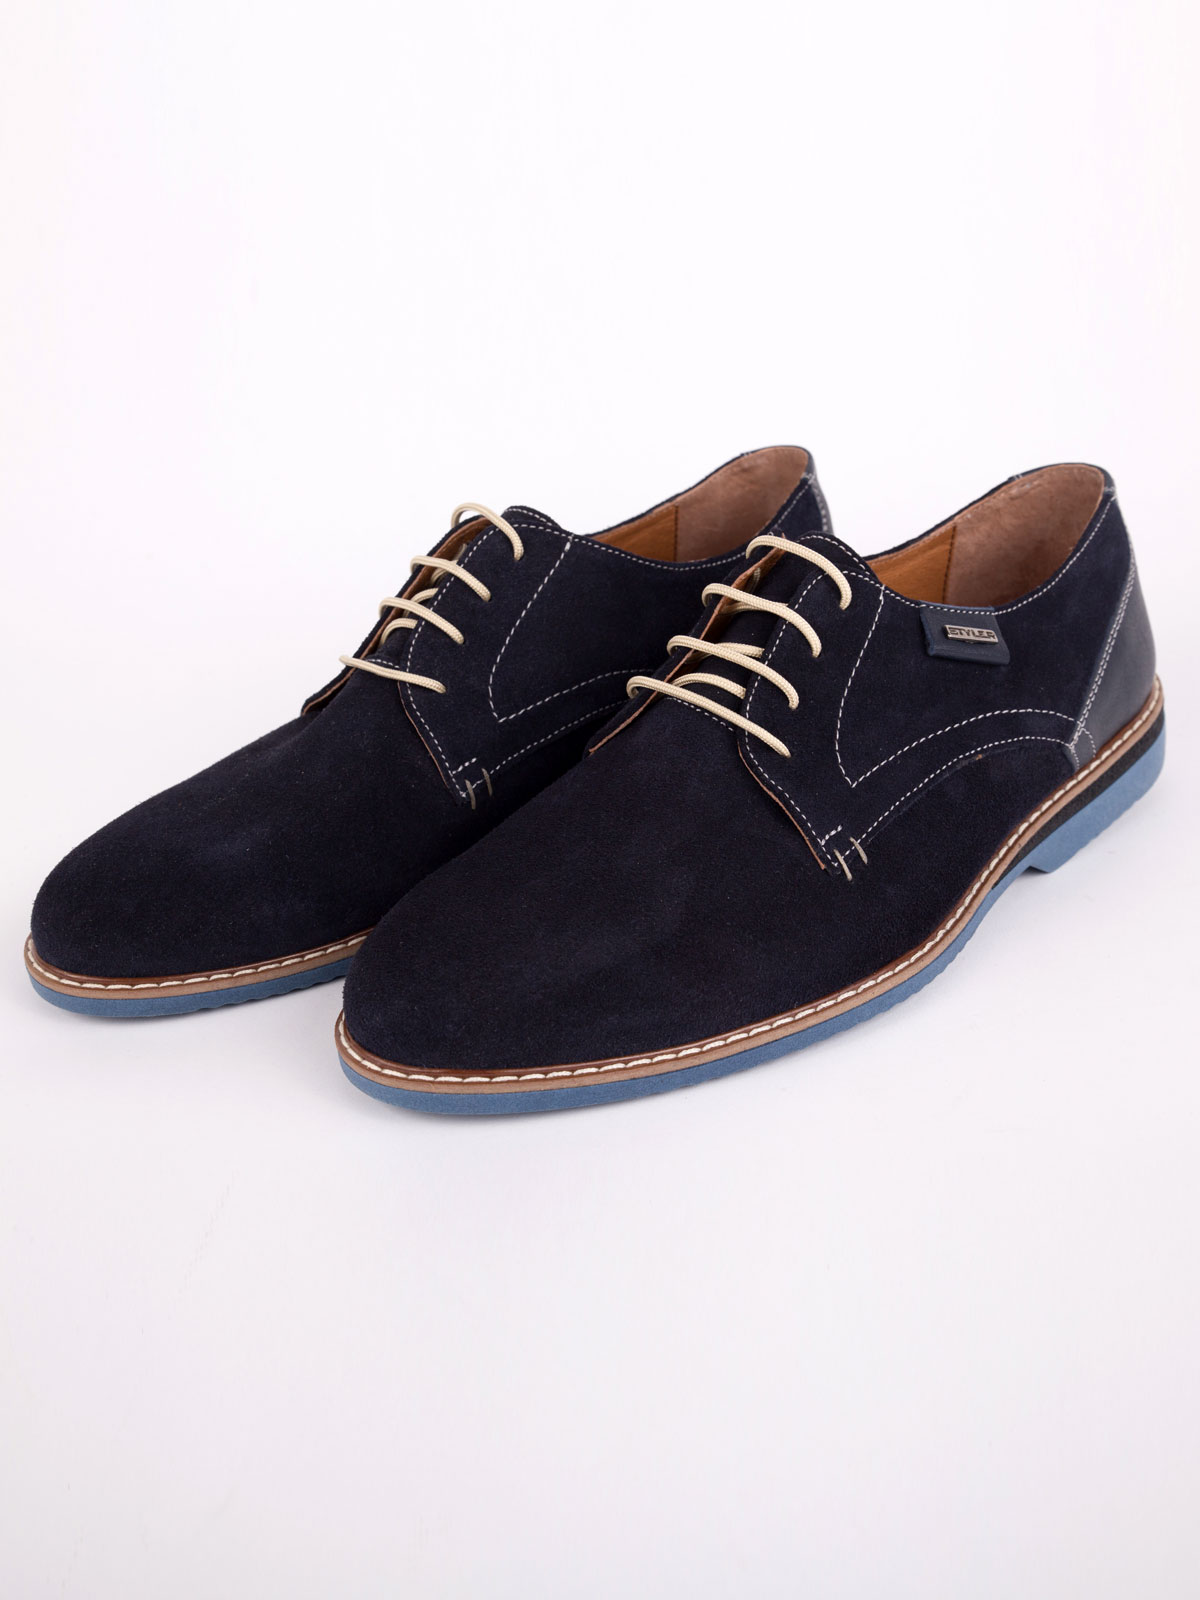 Suede shoes with leather accent - 81077 - € 83.24 img3